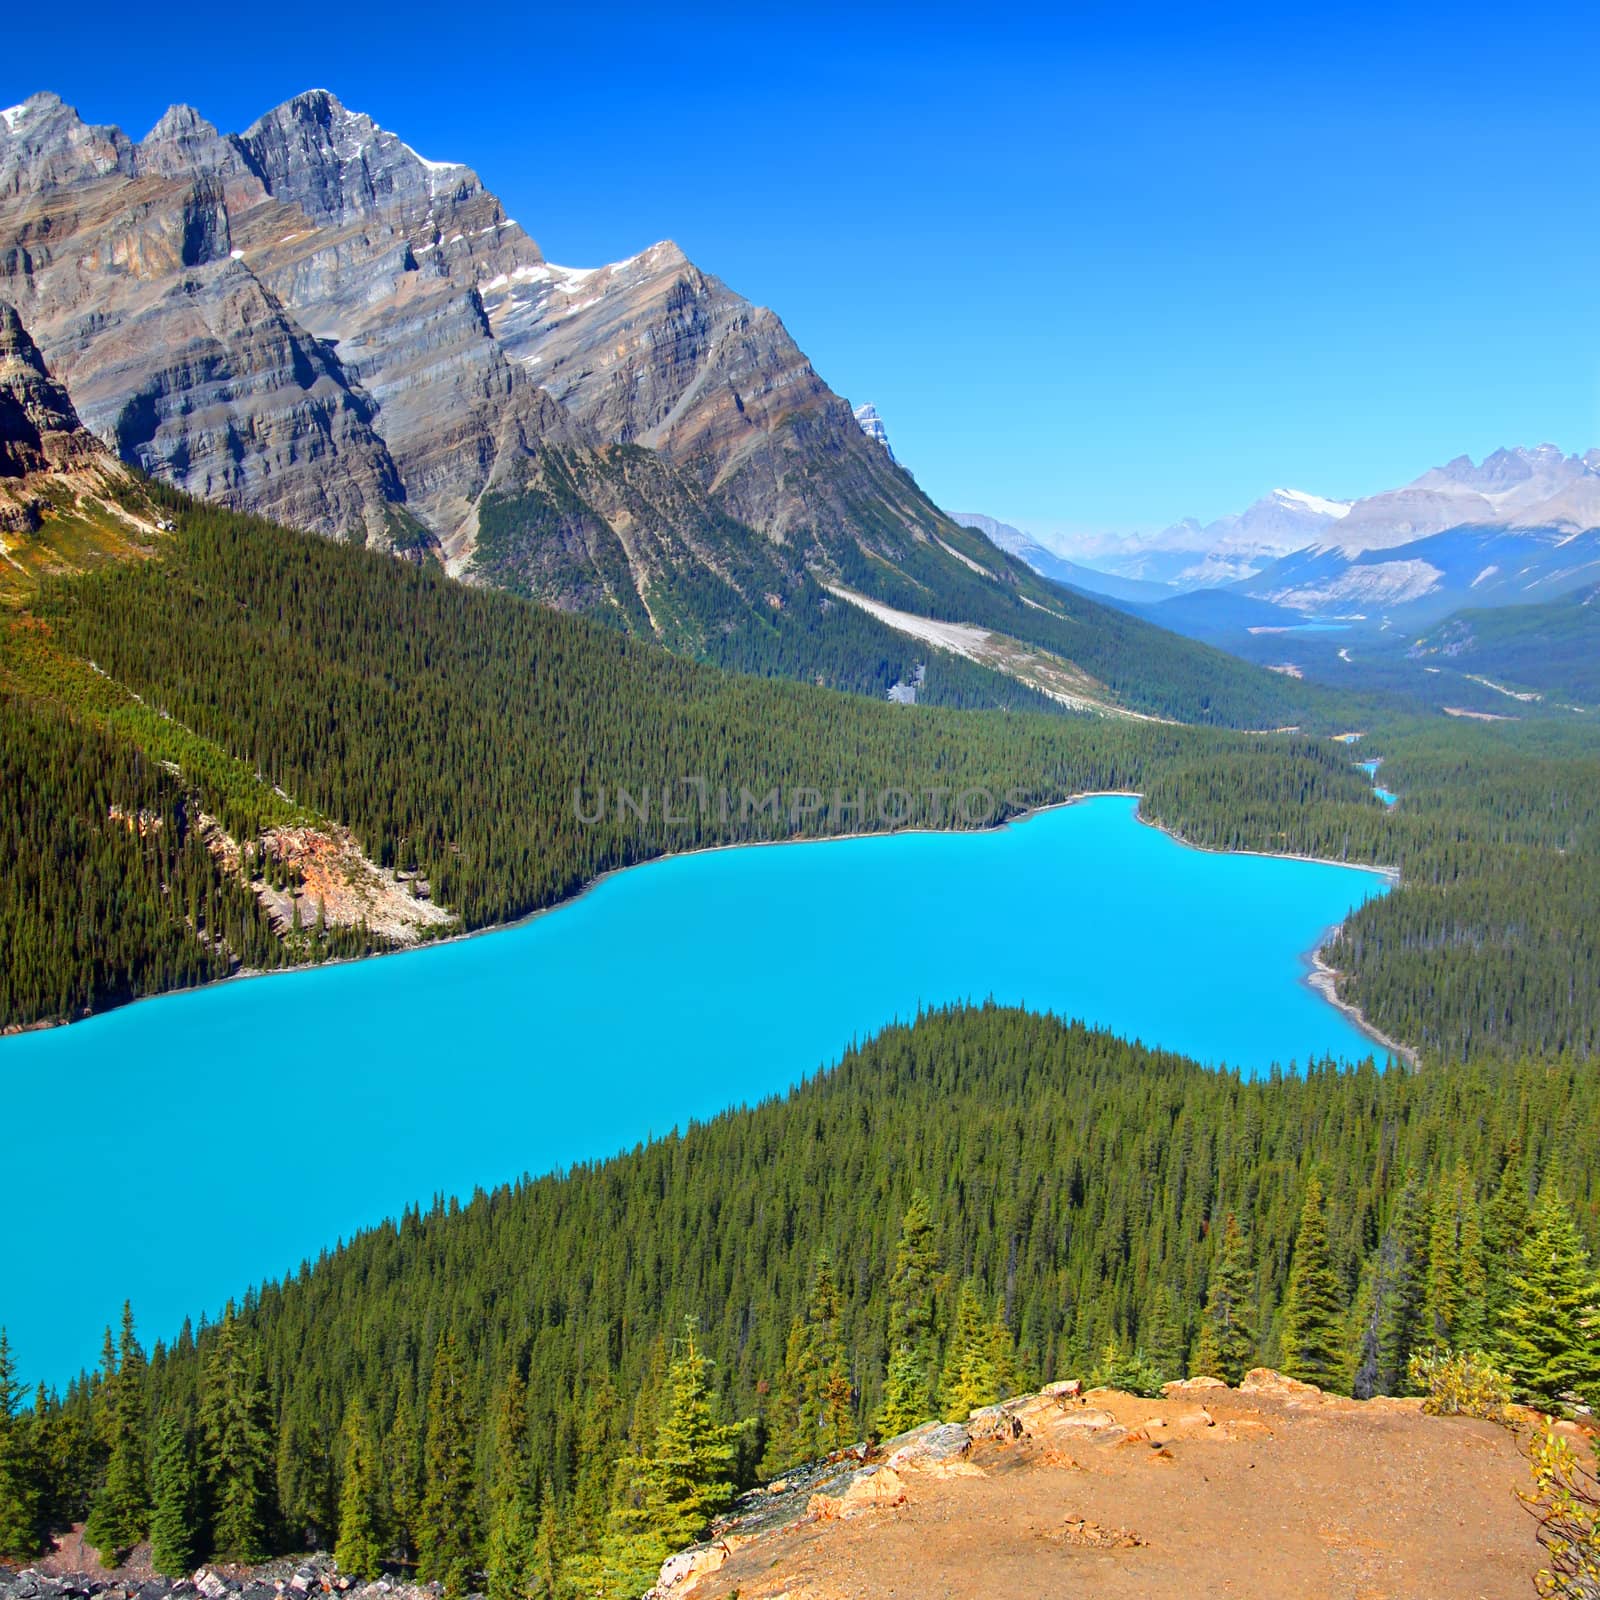 Magnificent blue waters of Peyto Lake of Banff National Park in Canada.